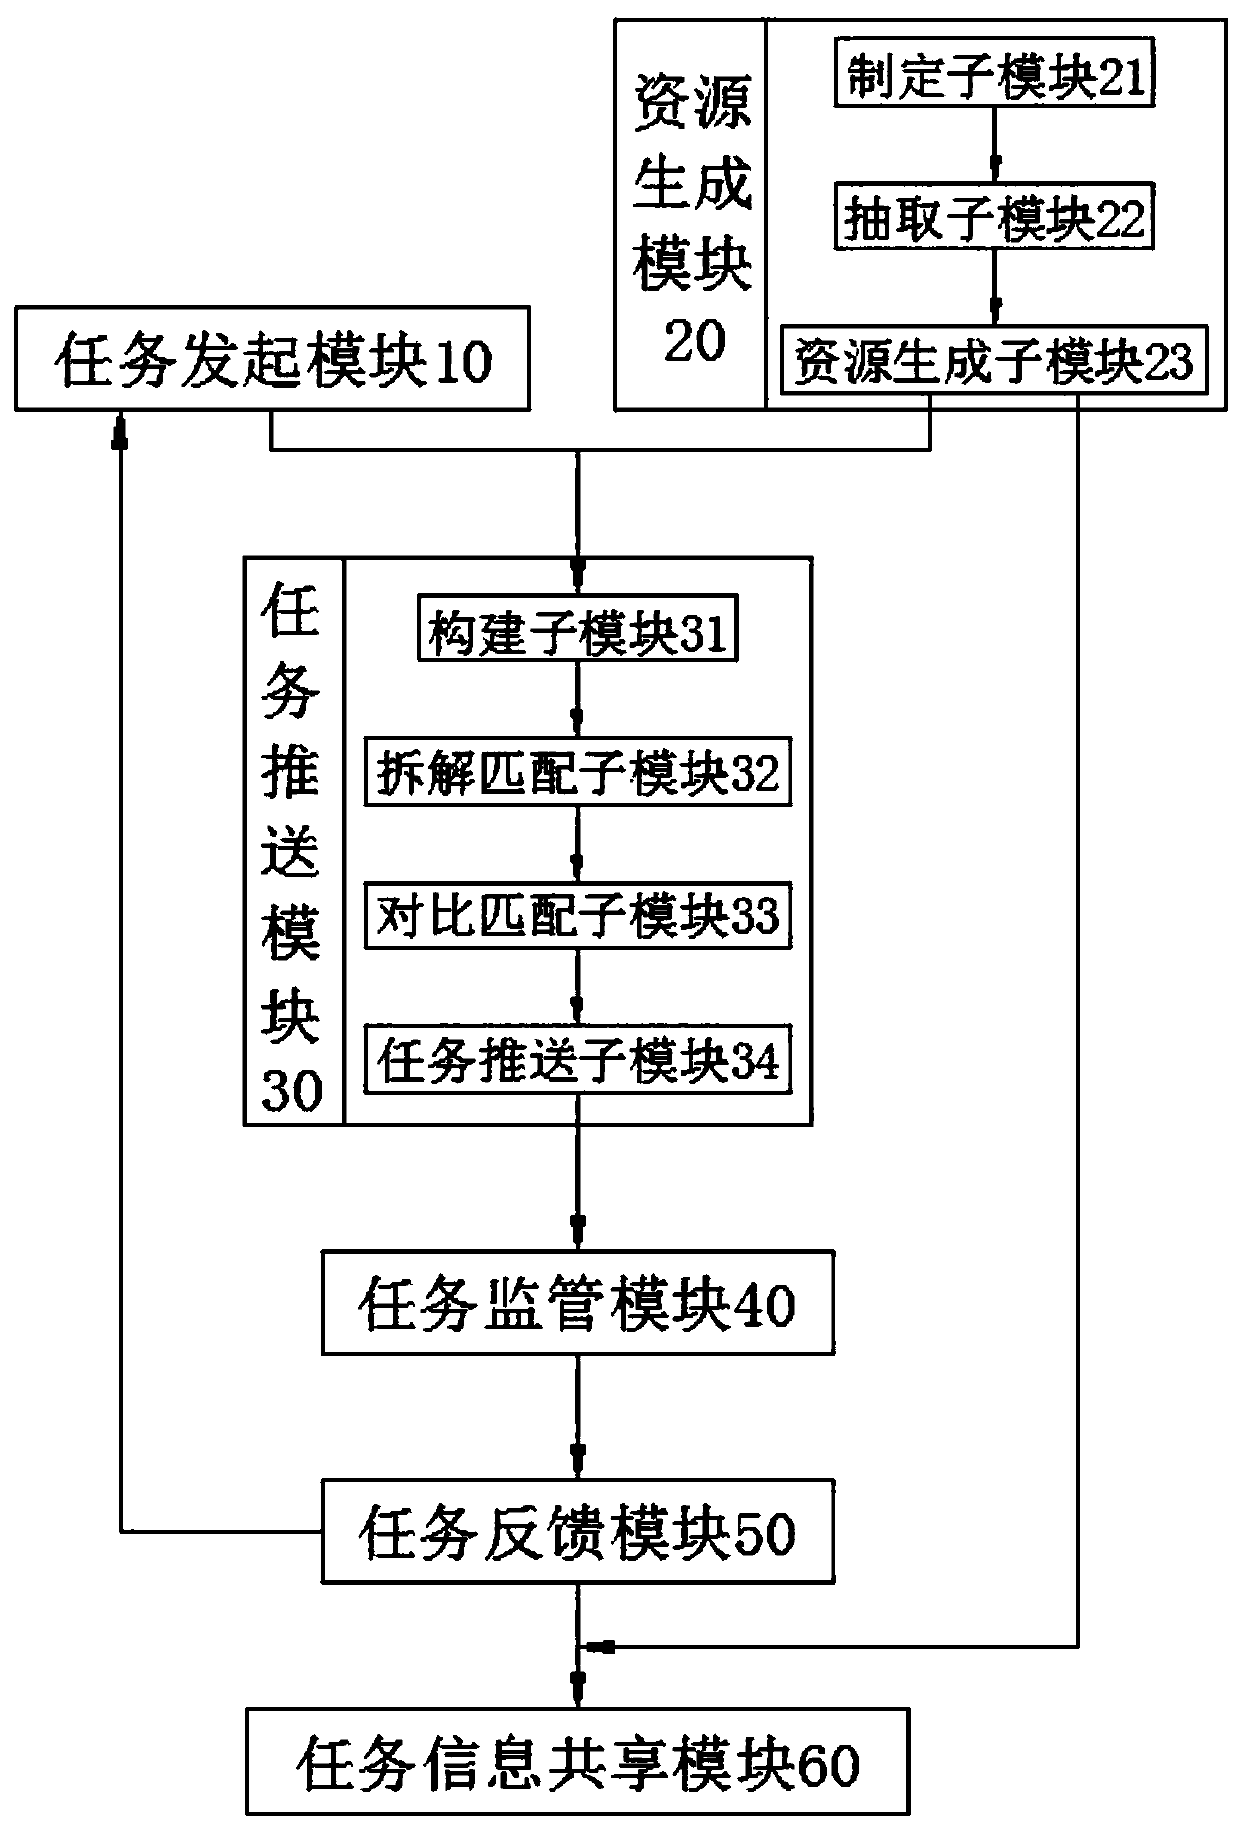 Intelligent operation system and method for cooperative investigation and cooperation